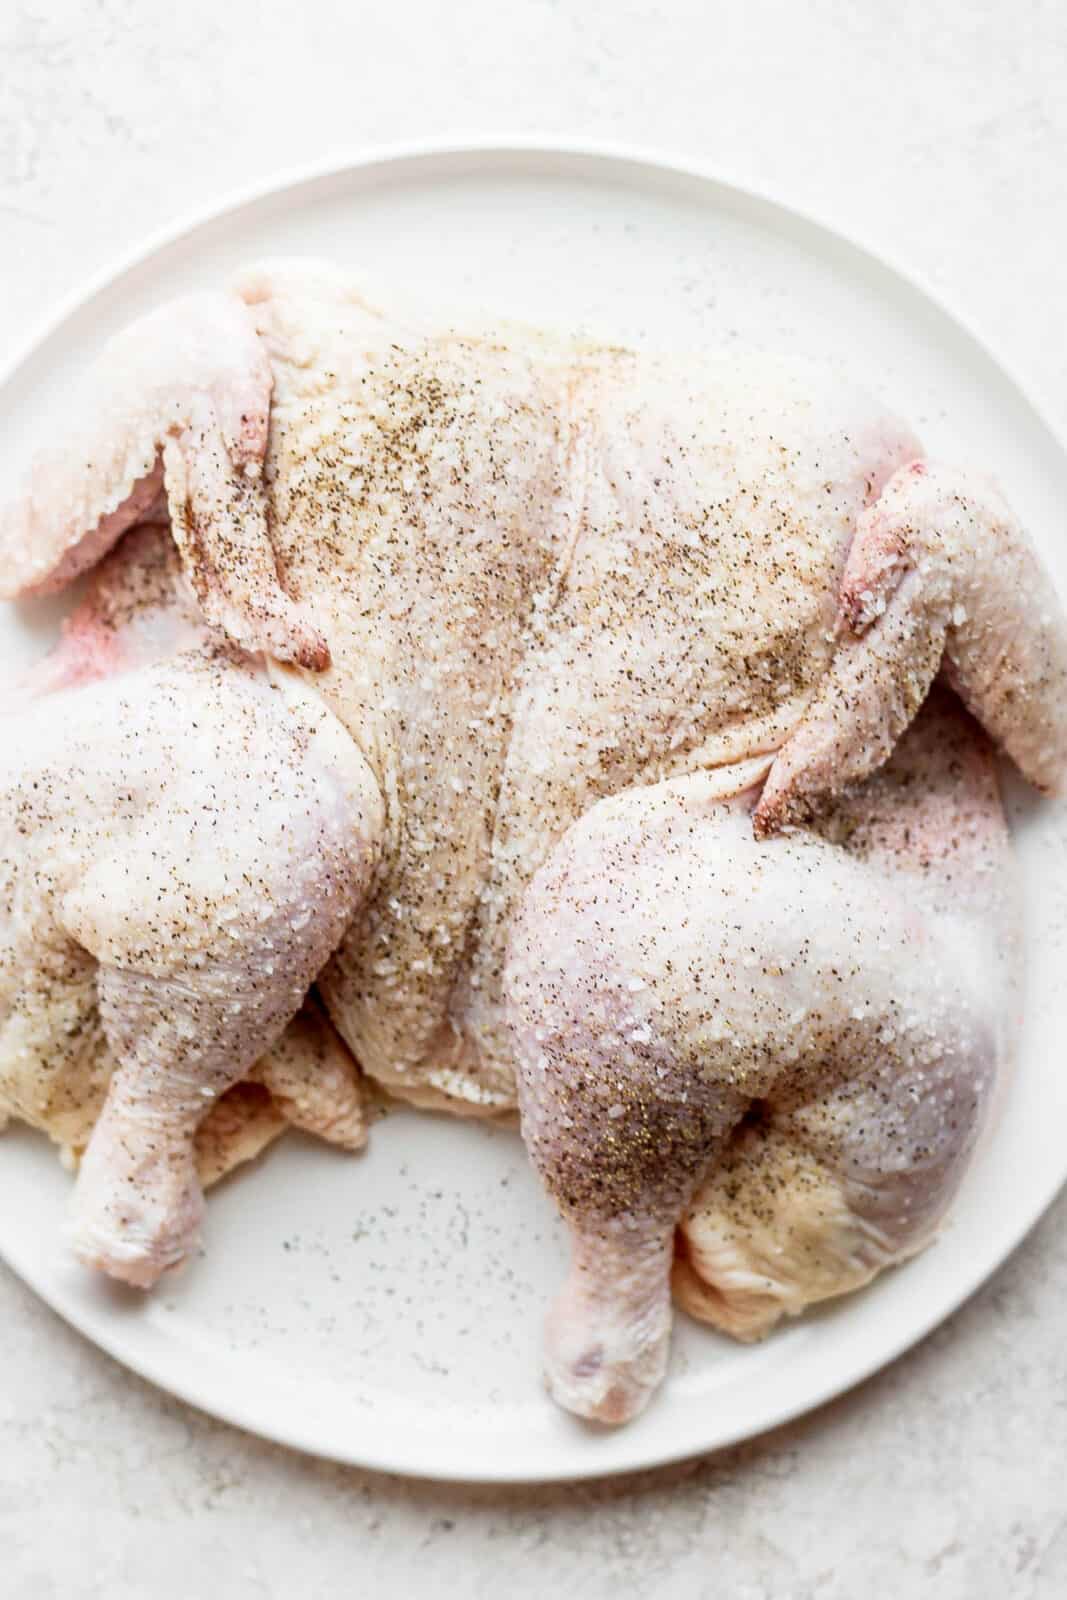 A raw spatchcocked chicken, seasoned, on a plate.